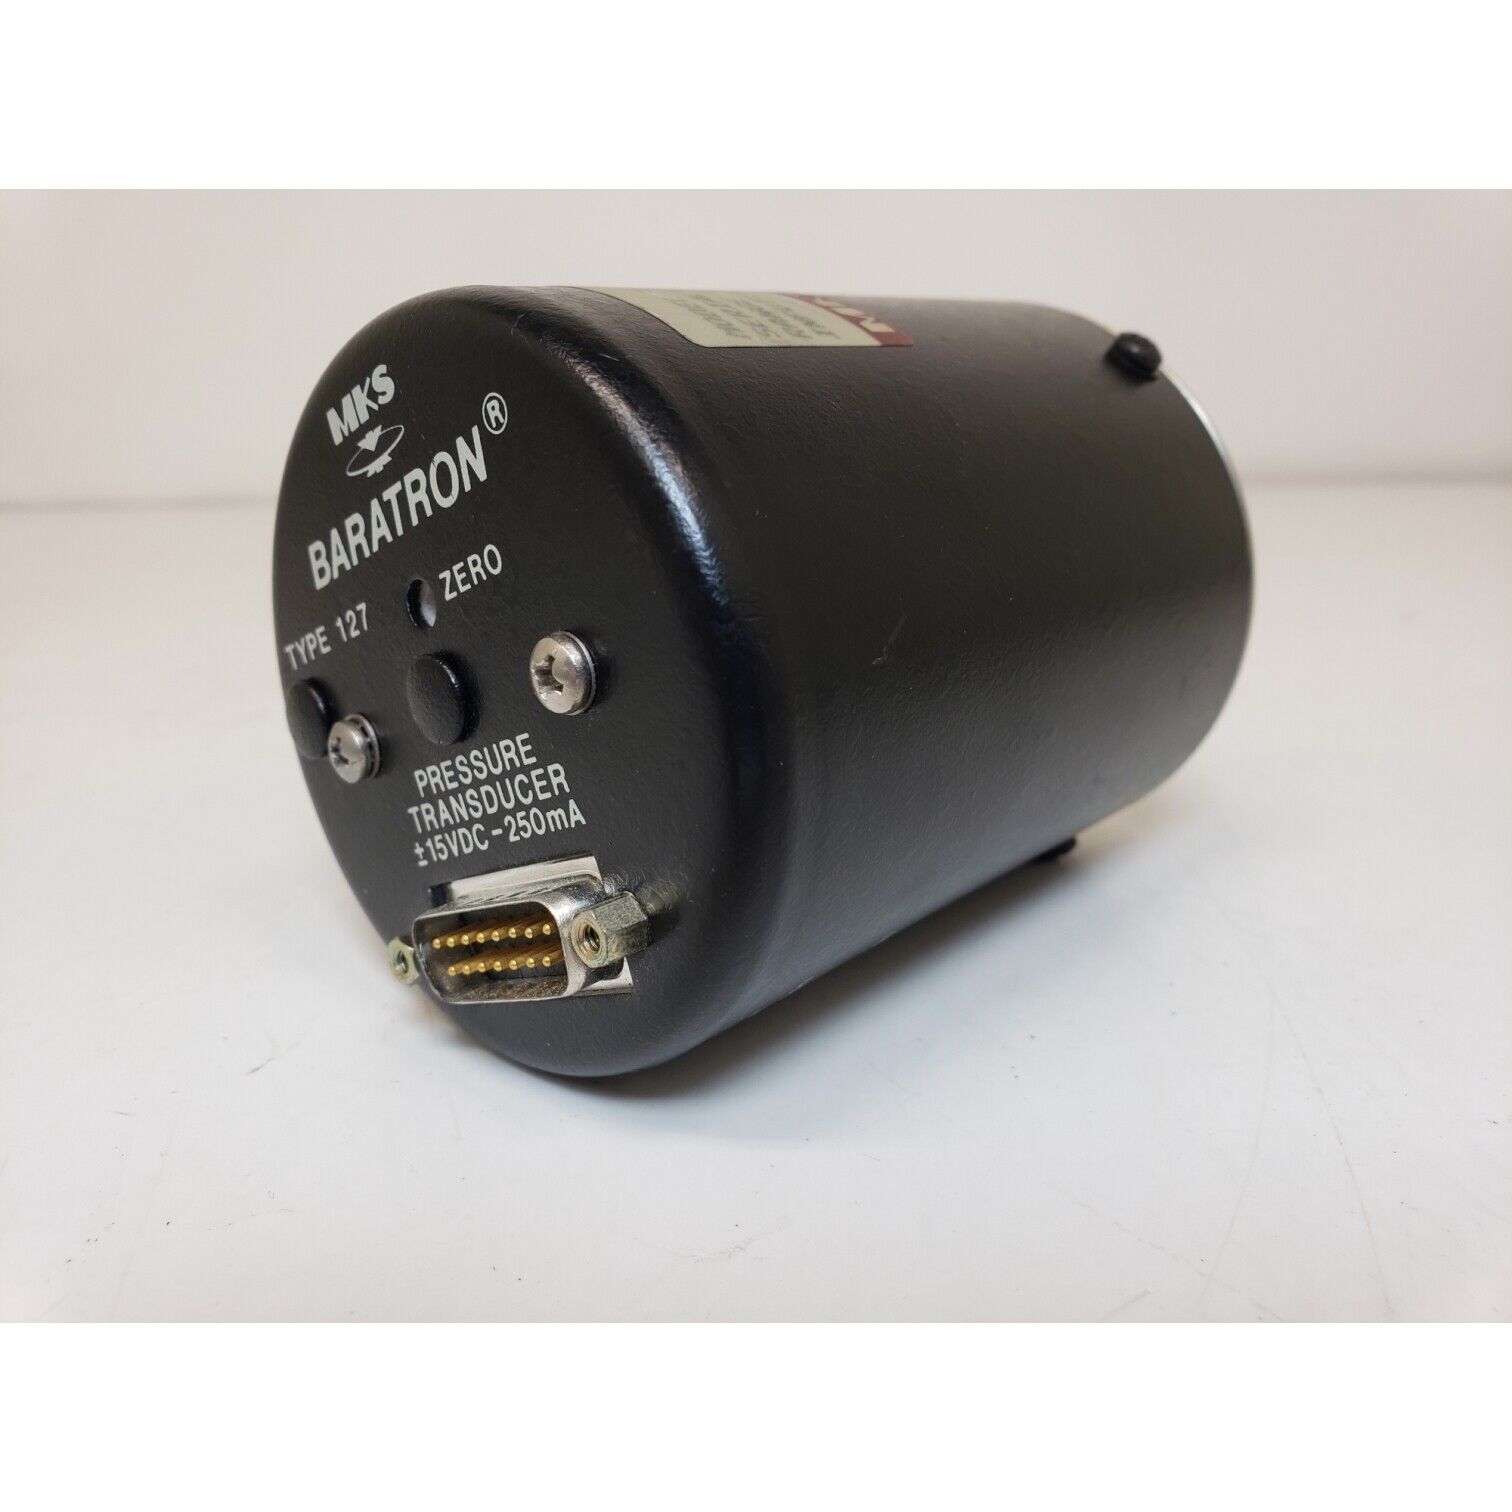 MKS BARATRON PRESSURE TRANSDUCER TYPE 127 .1 TORR 127AA-000-.1A